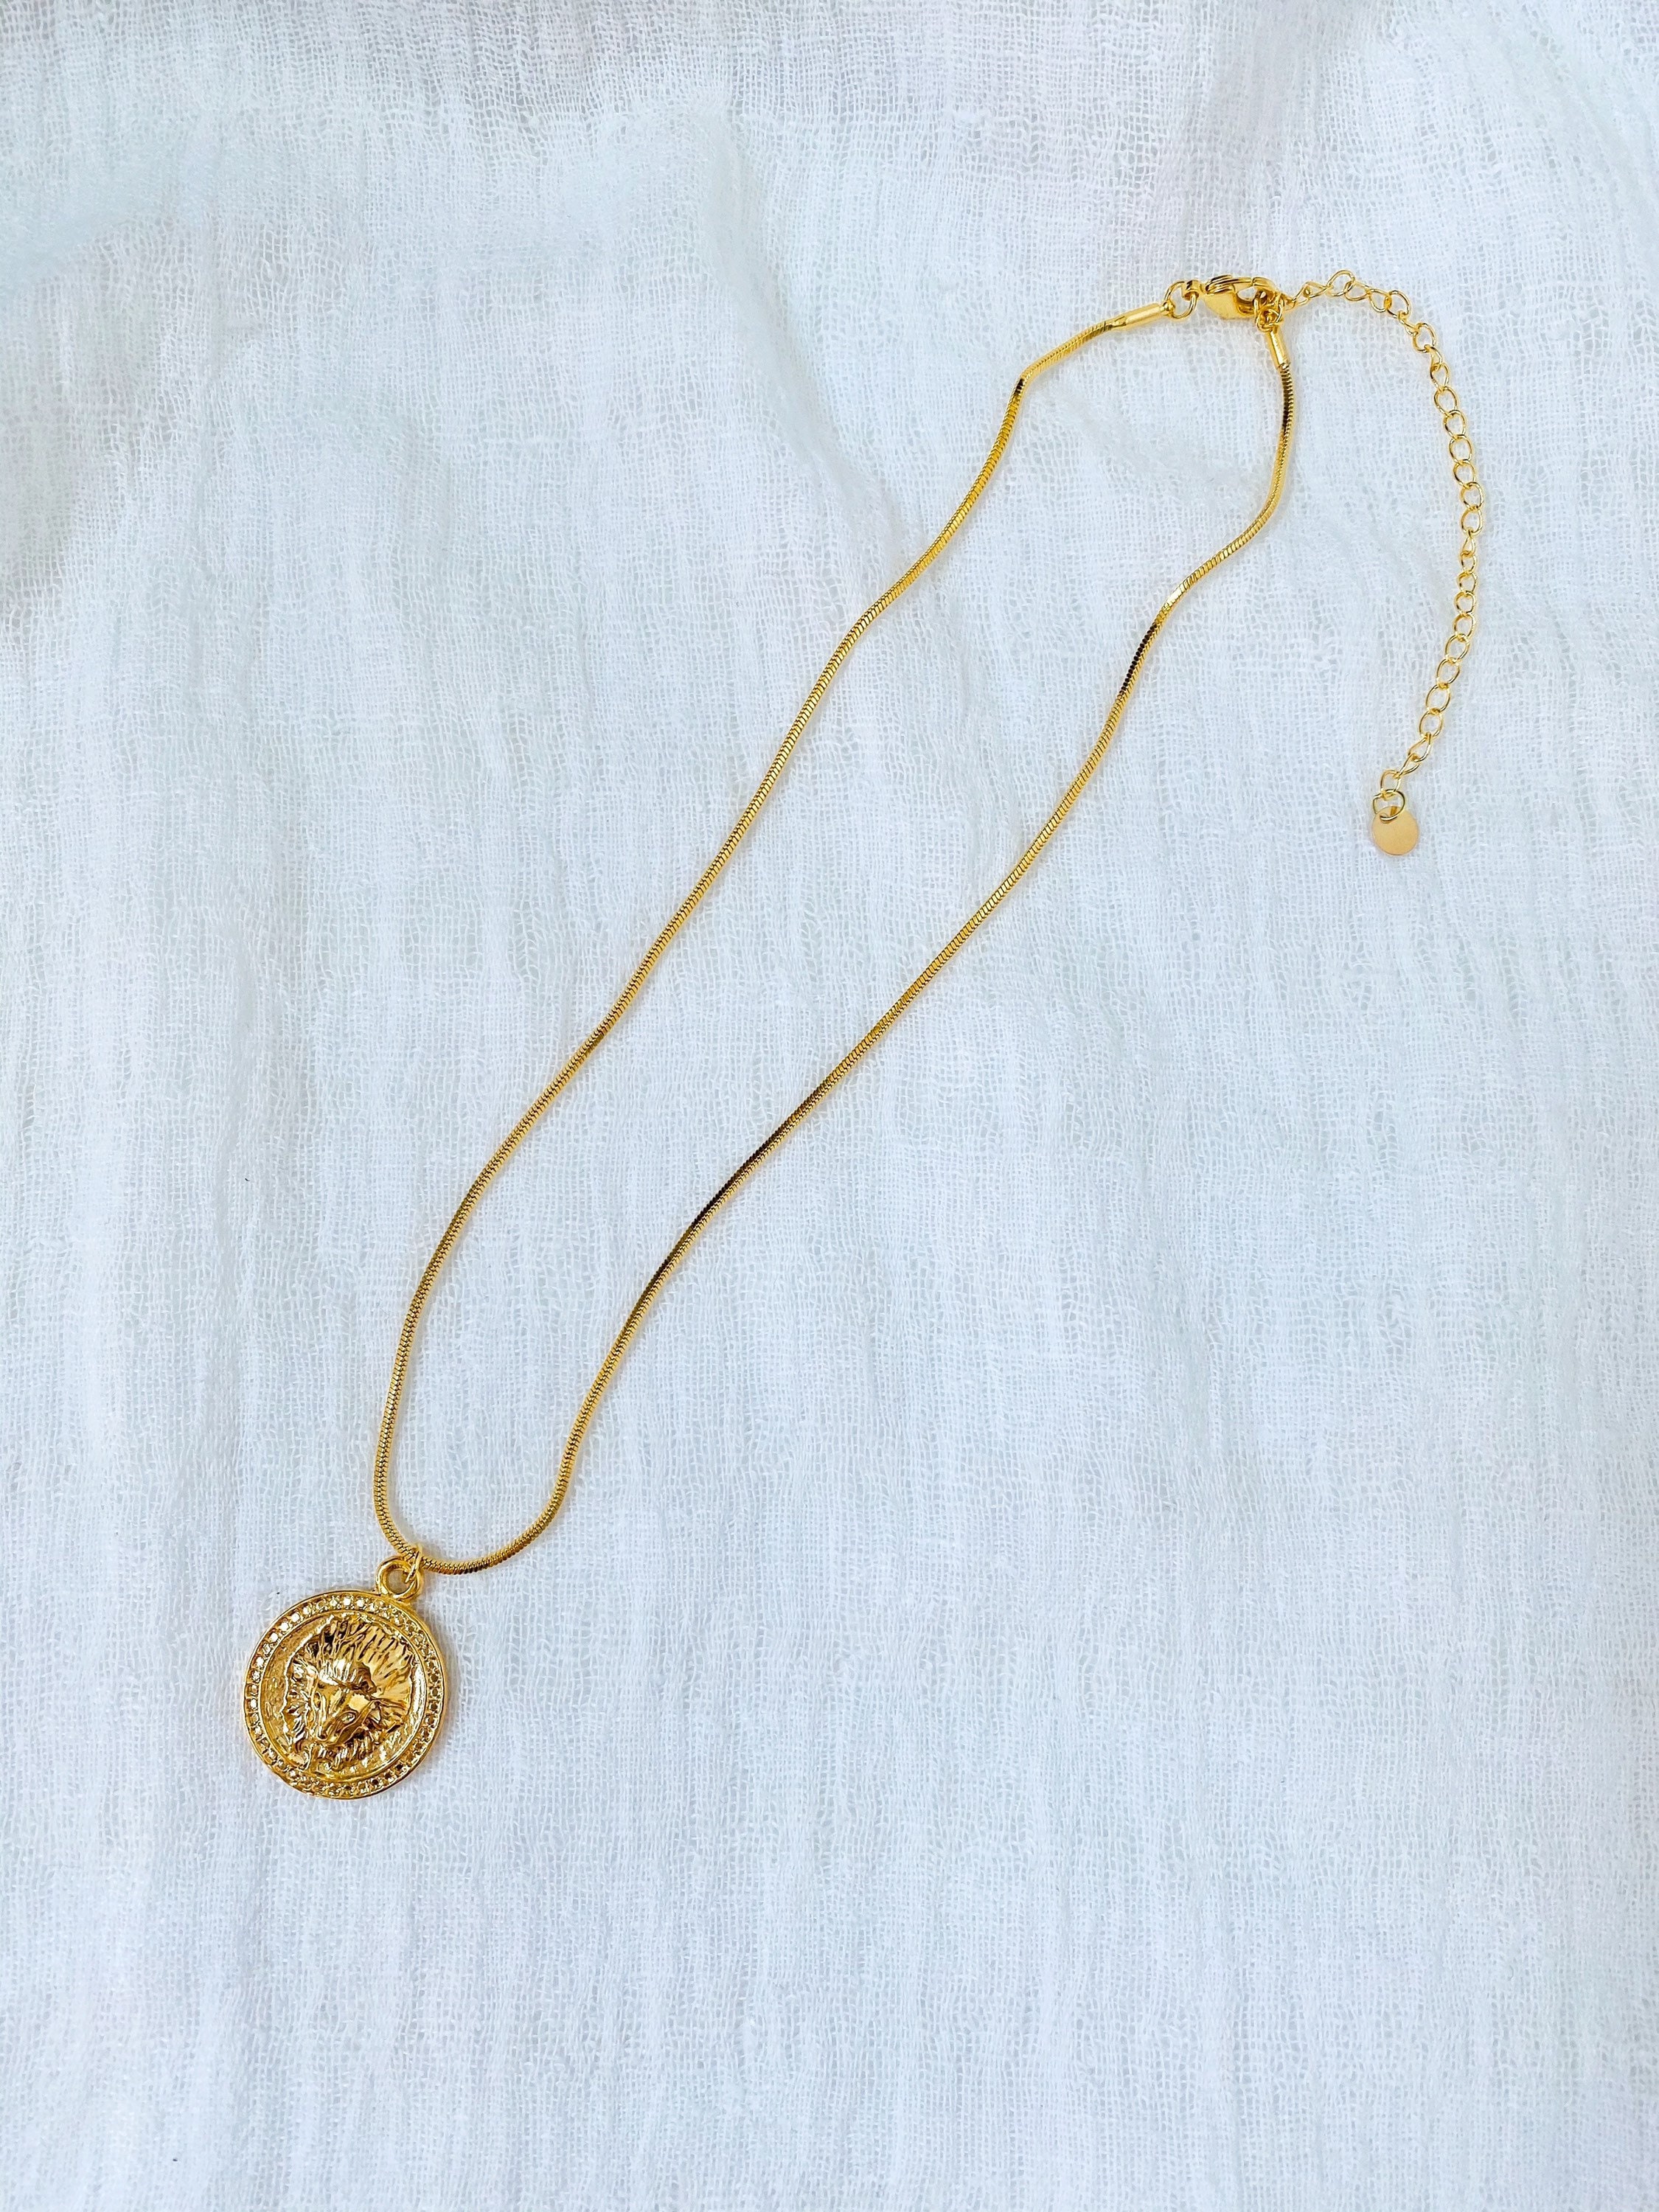 Gold Coin Pendant Choker Necklace | Etsy